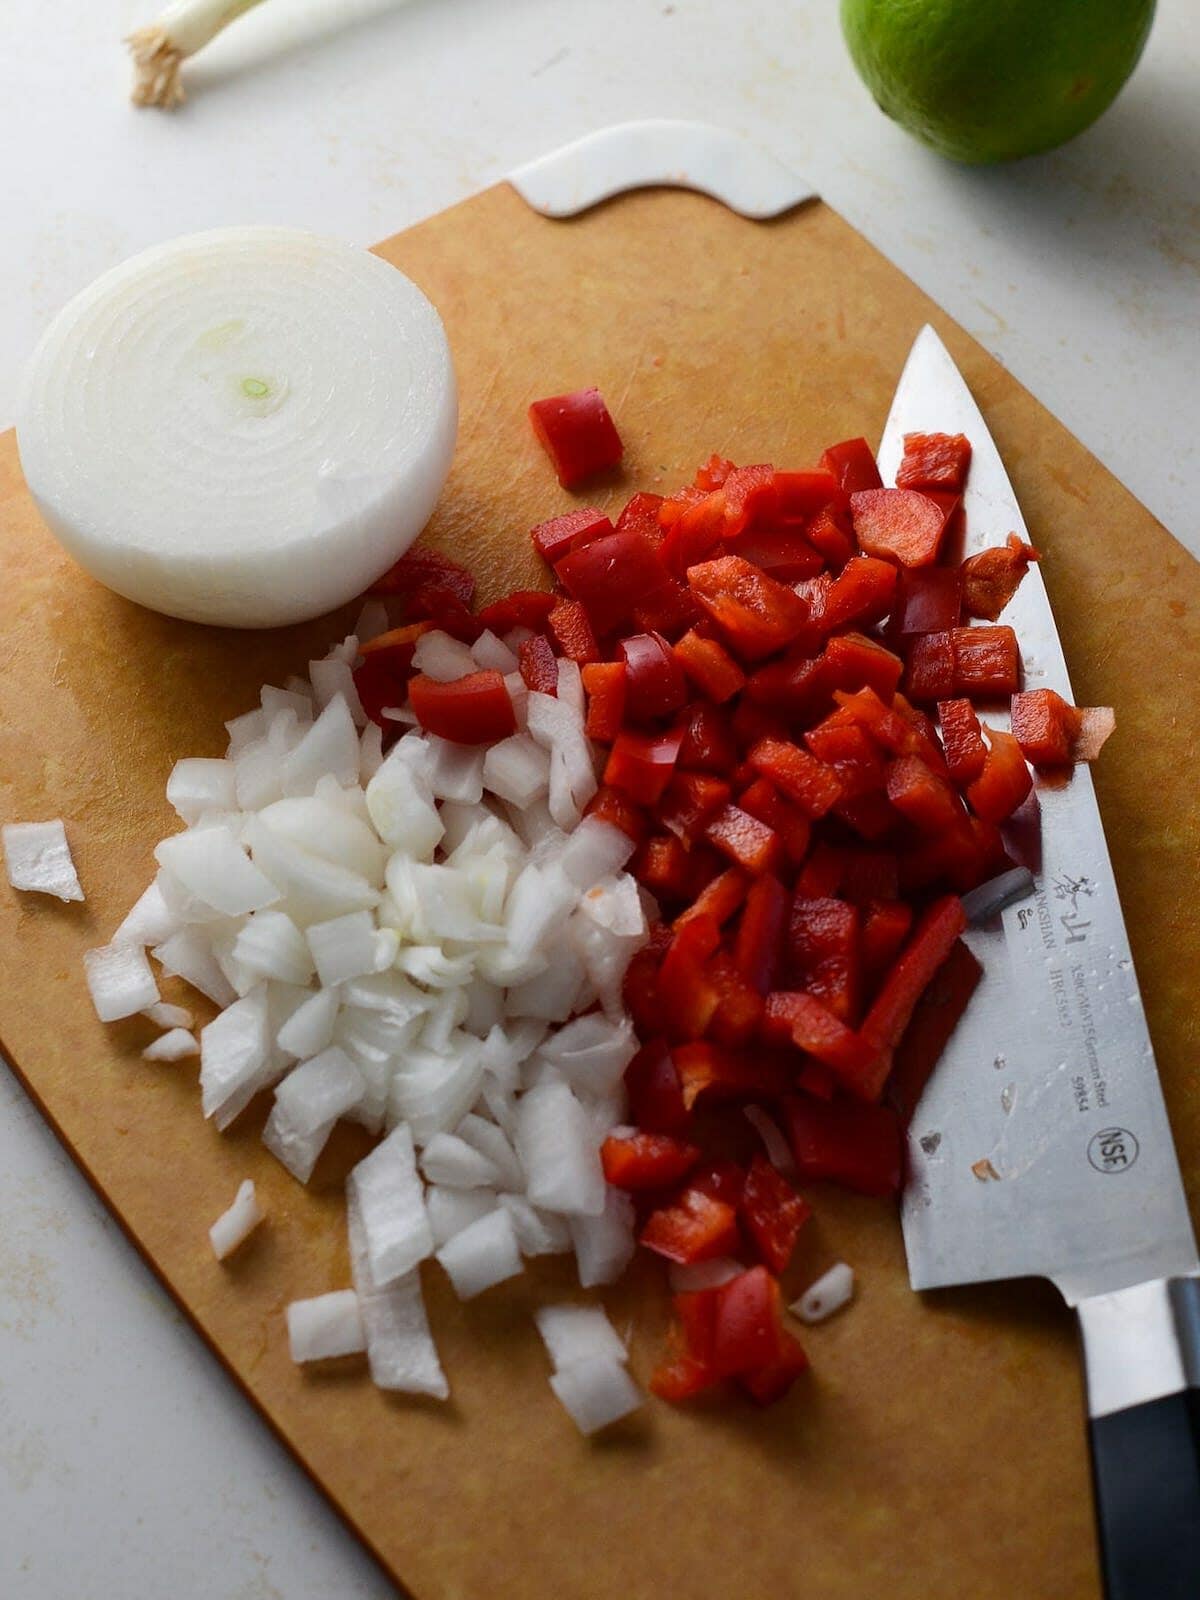 This is a photo of diced onion and red pepper.